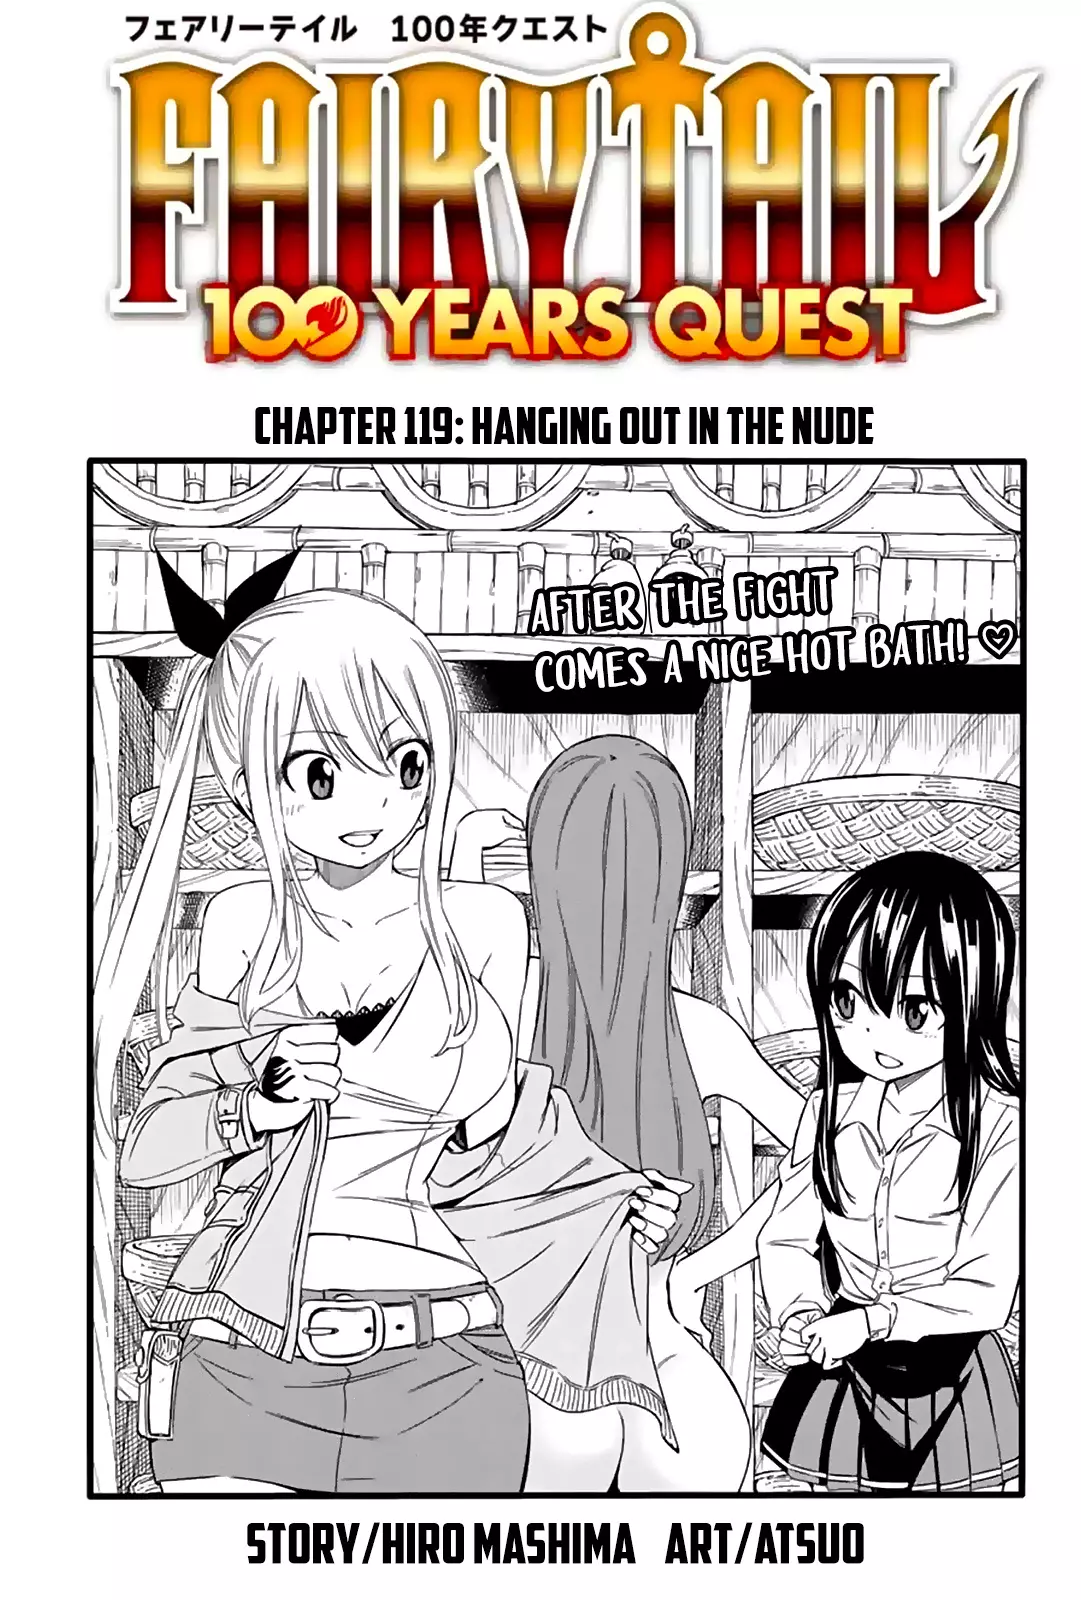 read fairy tail 100 year quest